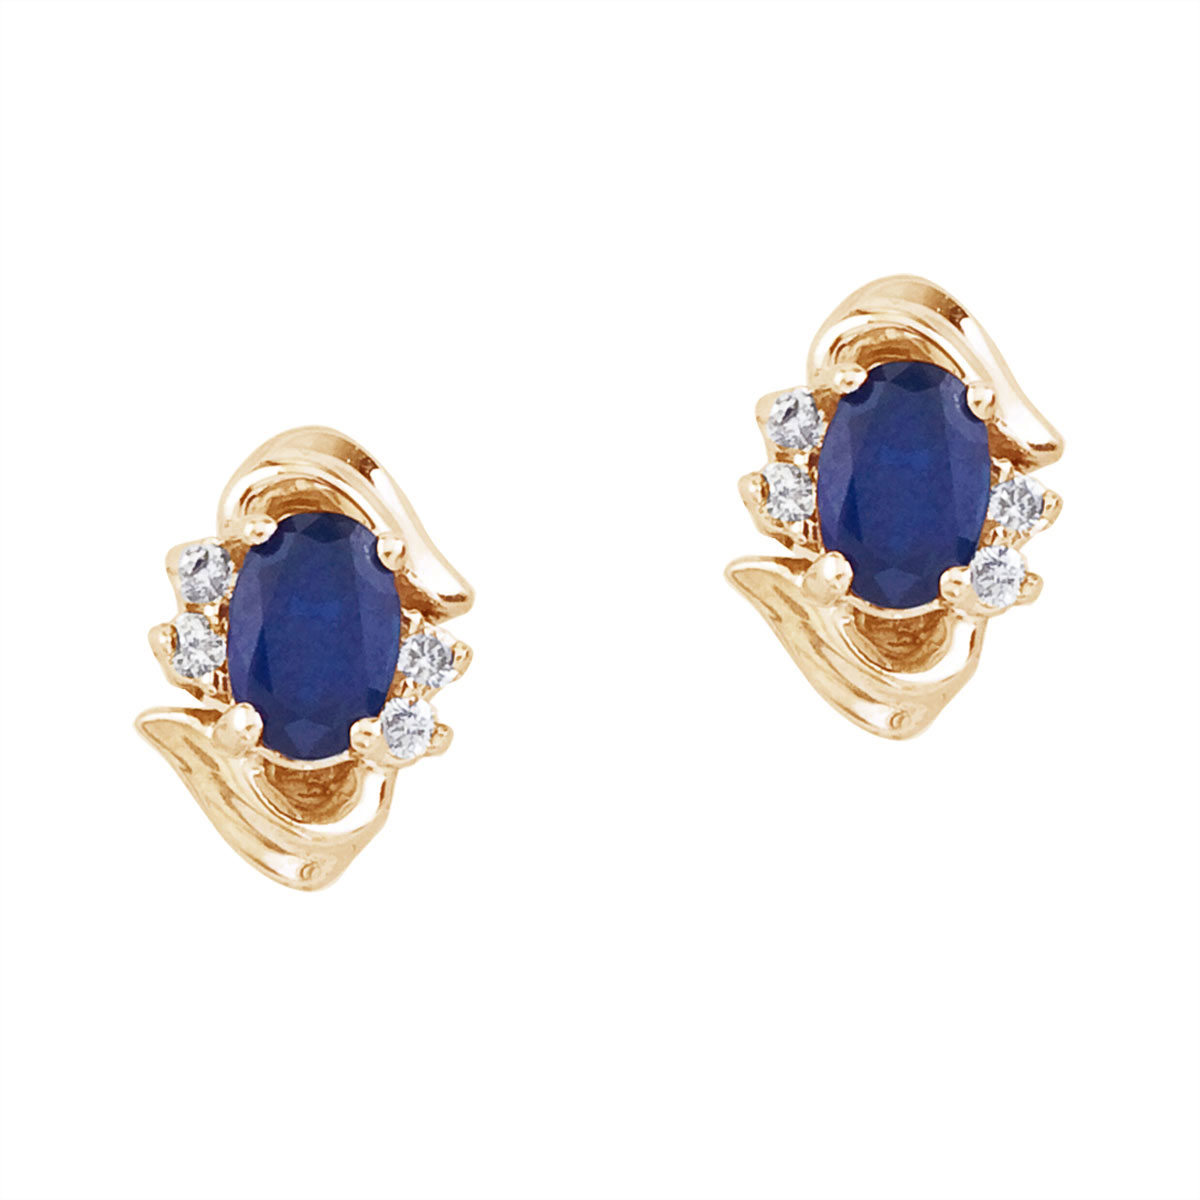 Stunning 14k yellow gold and sapphire earrings. Featuring natural 6x4 mm oval saphires and .11 to...